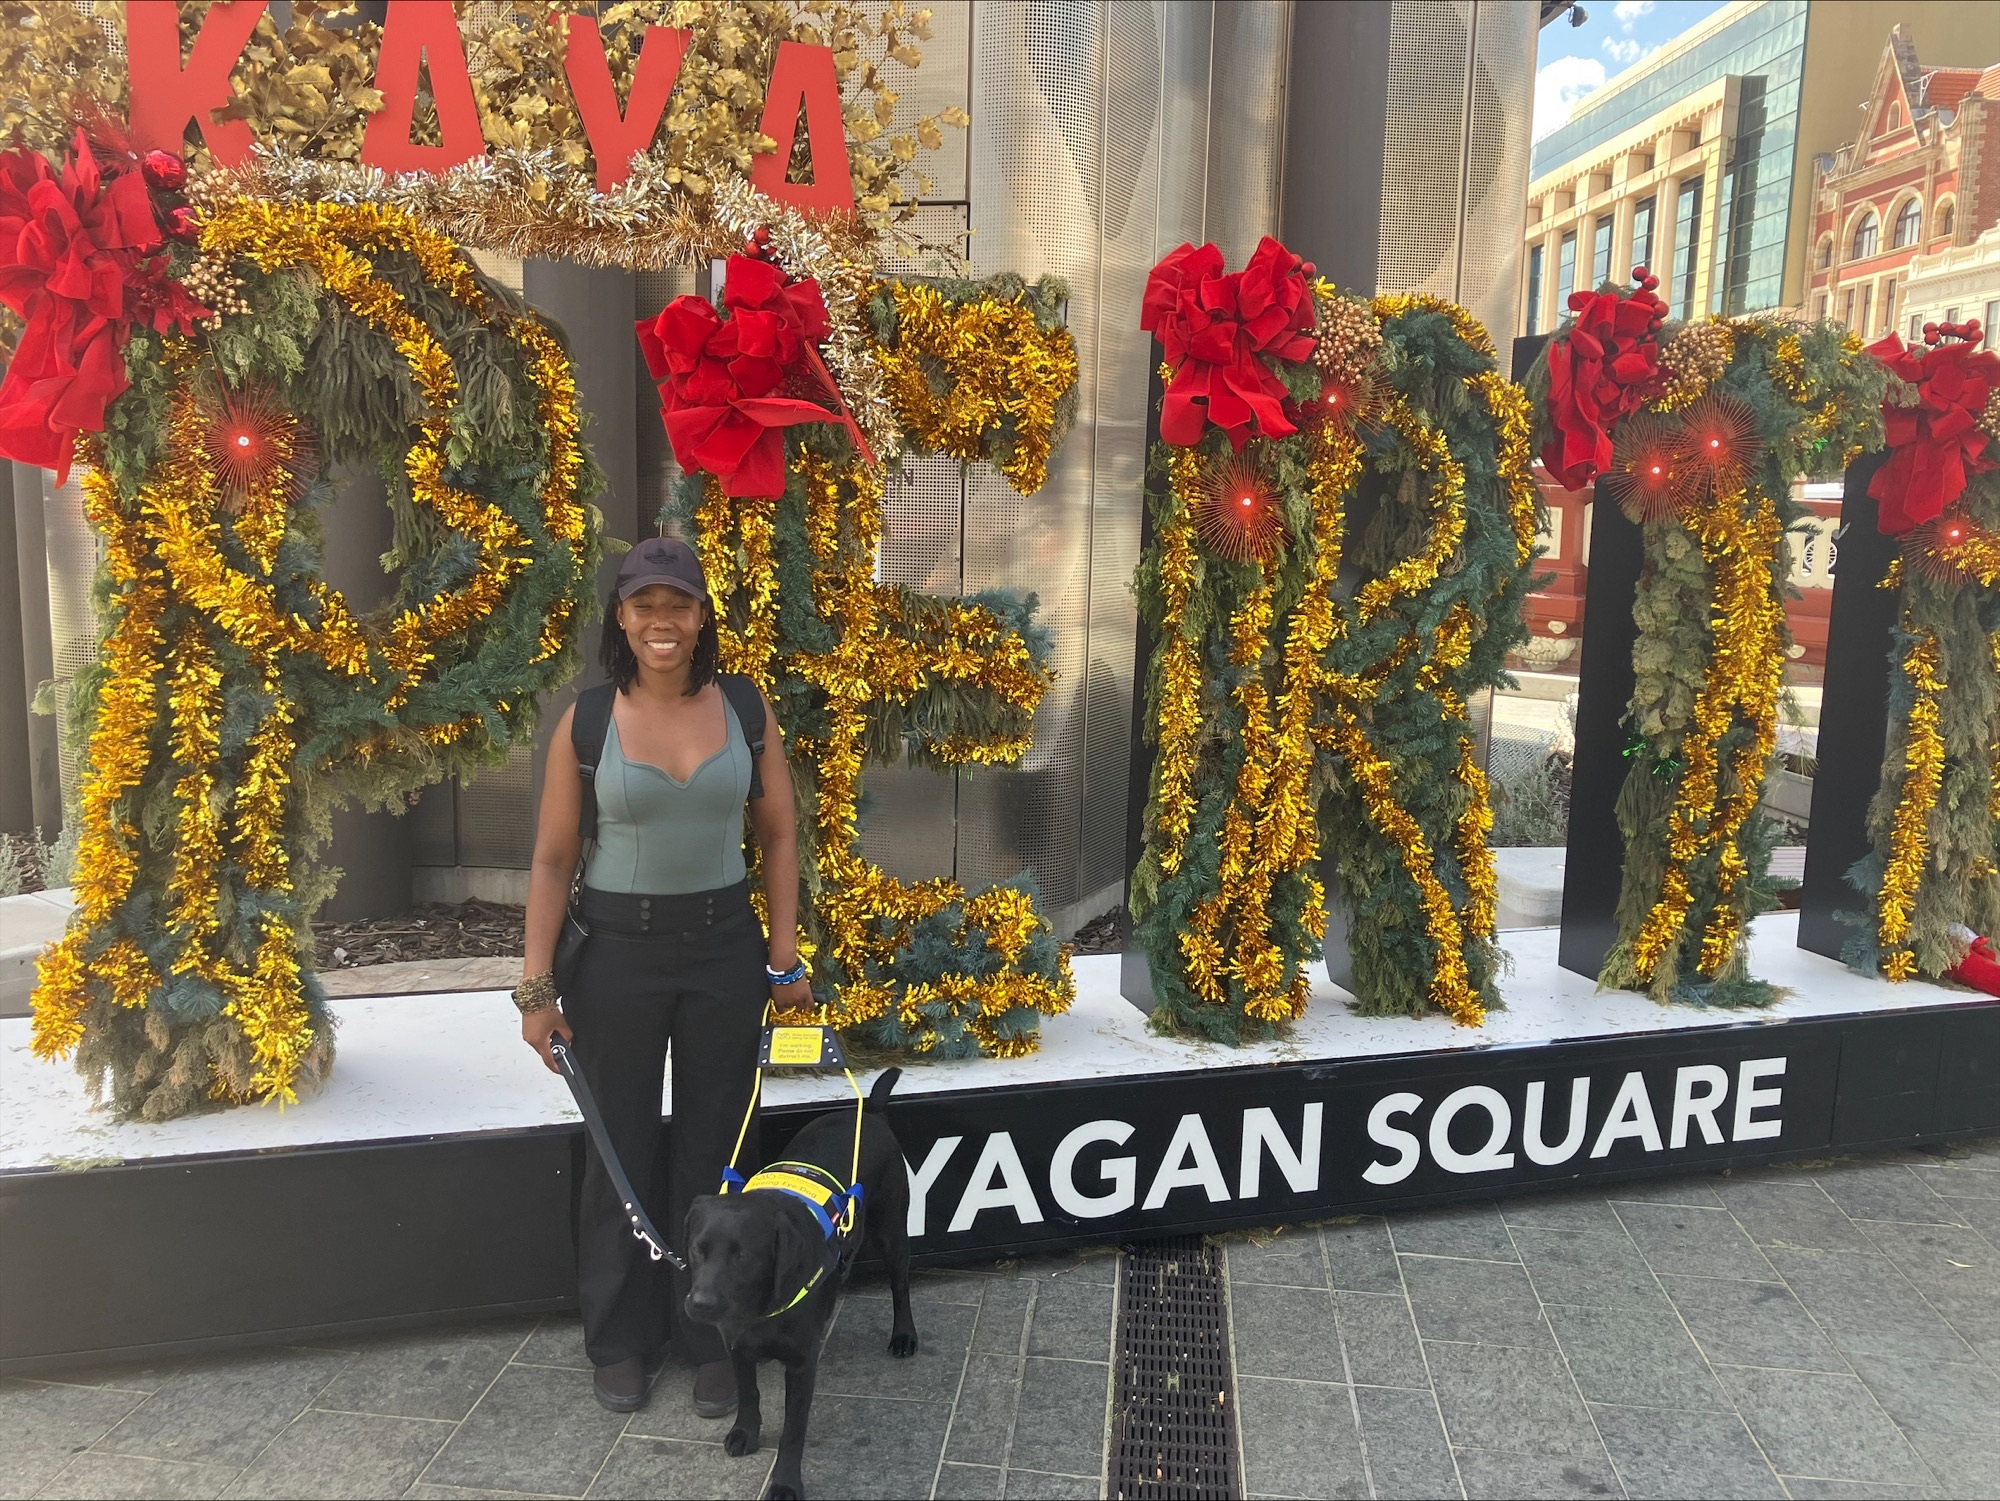 Thayana and seeing eye dog shaylah standing in front of a group of hedge trimmed letters spelling out PERTH